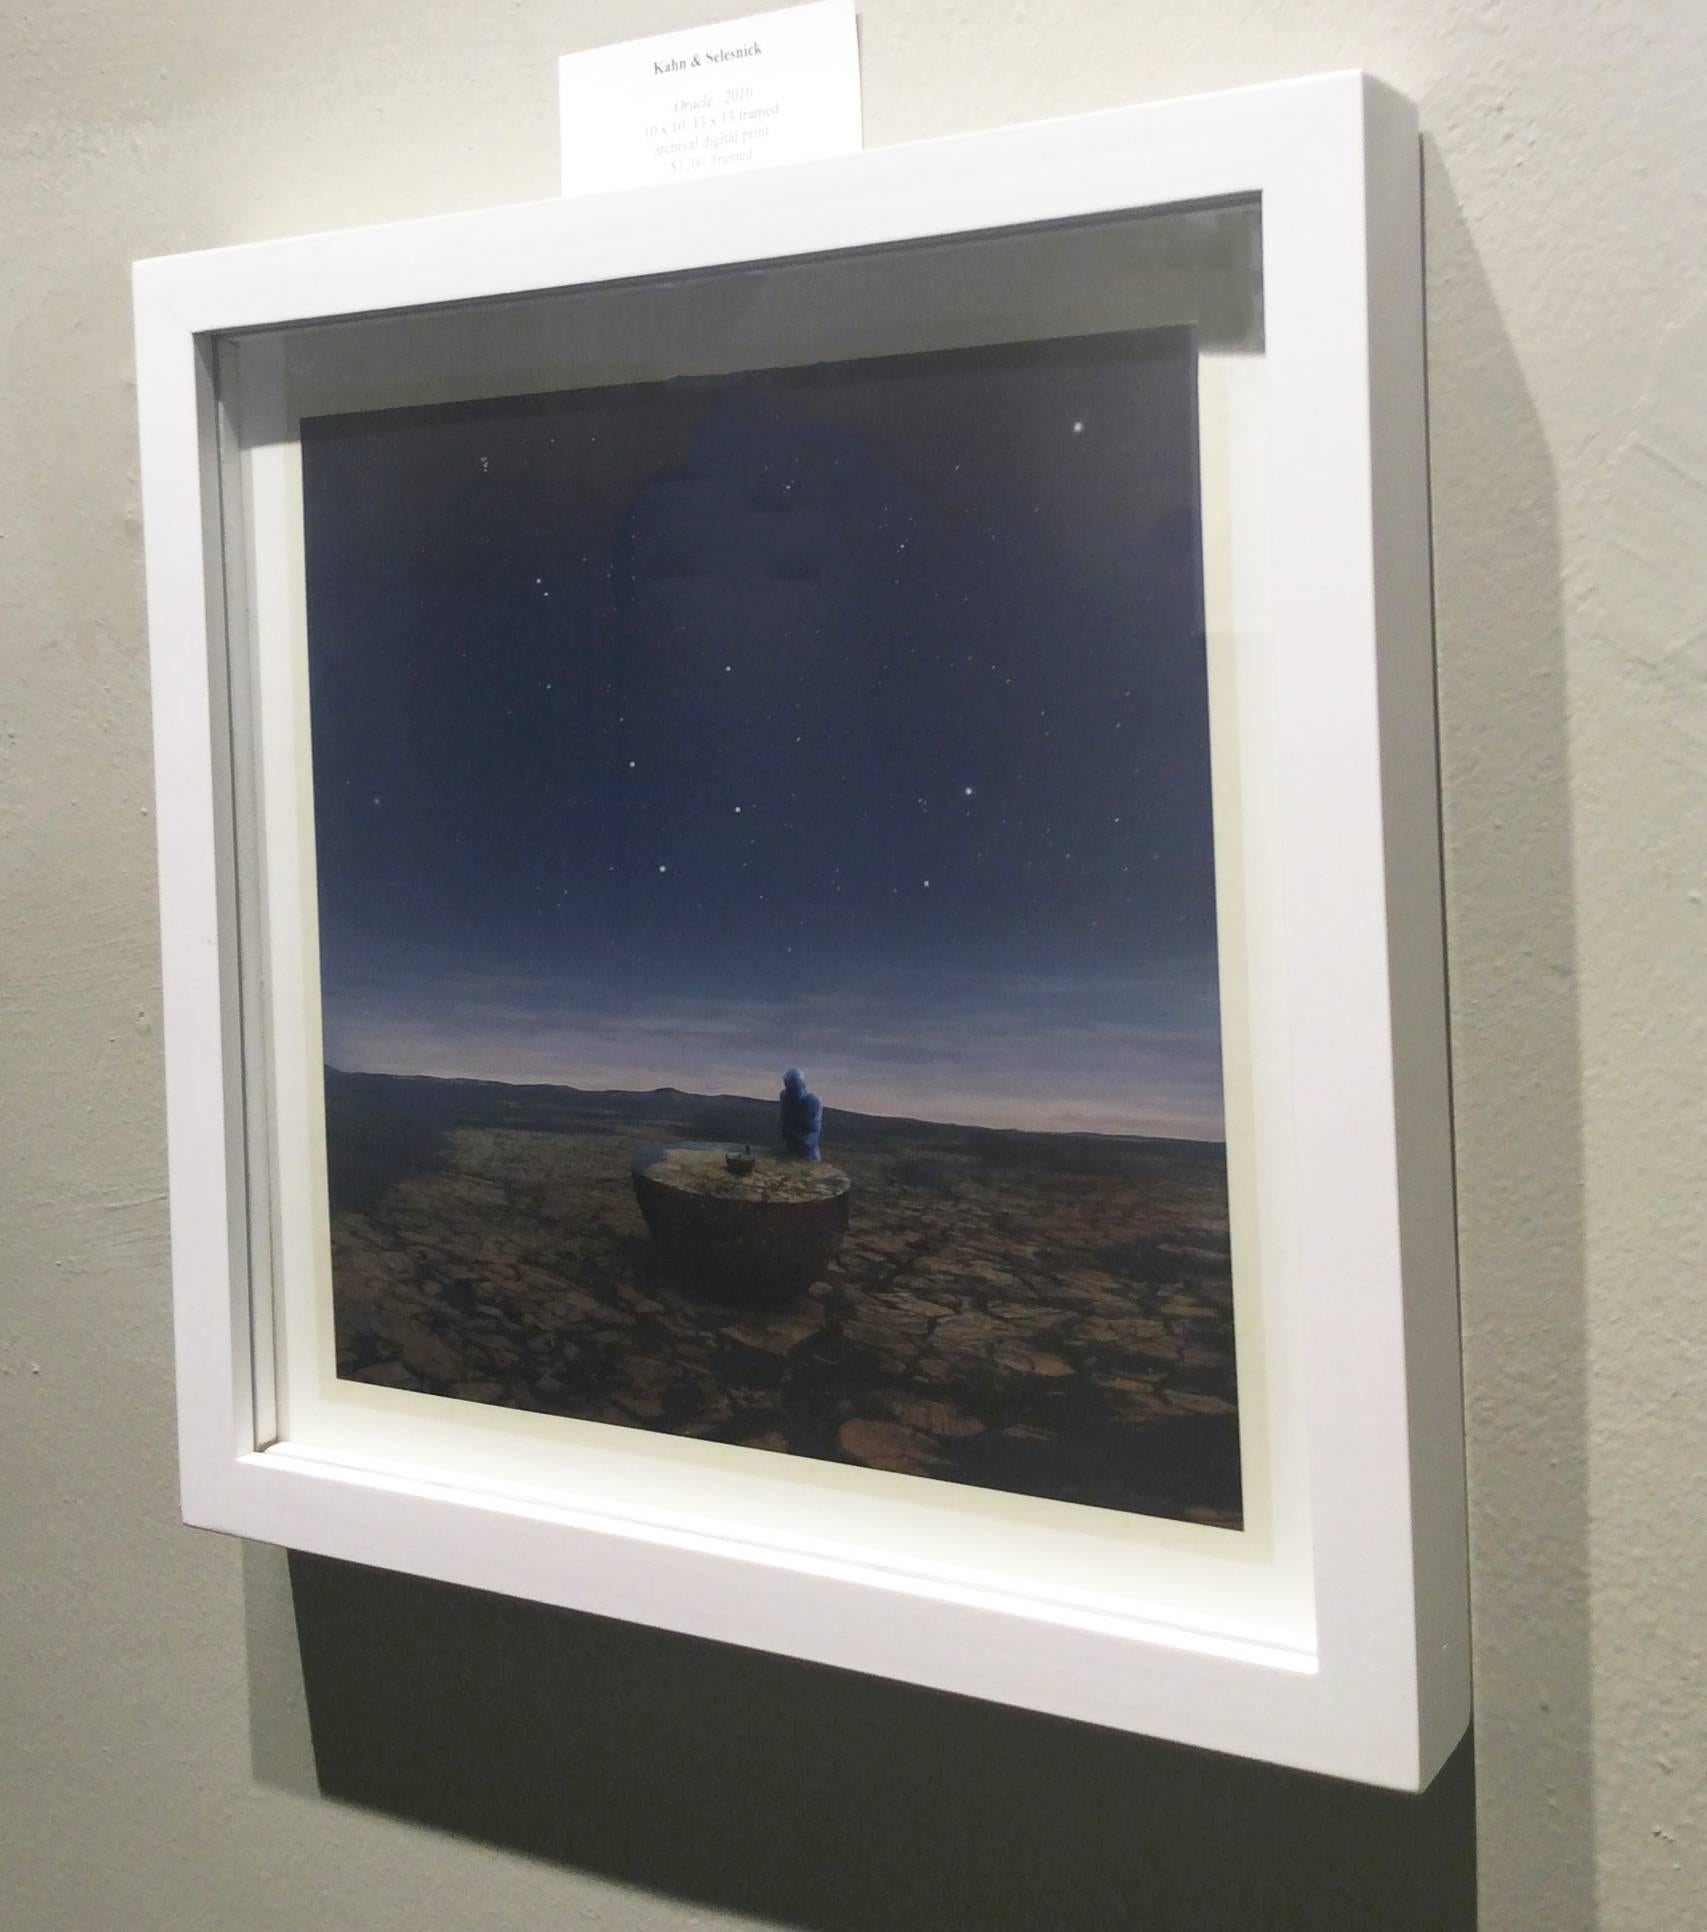 archival pigment print
10 x 10 inches unframed, 13 x 13 inches in white frame

This contemporary, surrealist style photograph was printed by the artistic duo, Kahn & Selesnick, in 2010. The print is part of their 'Mar: Adrift on the Hourglass Sea'